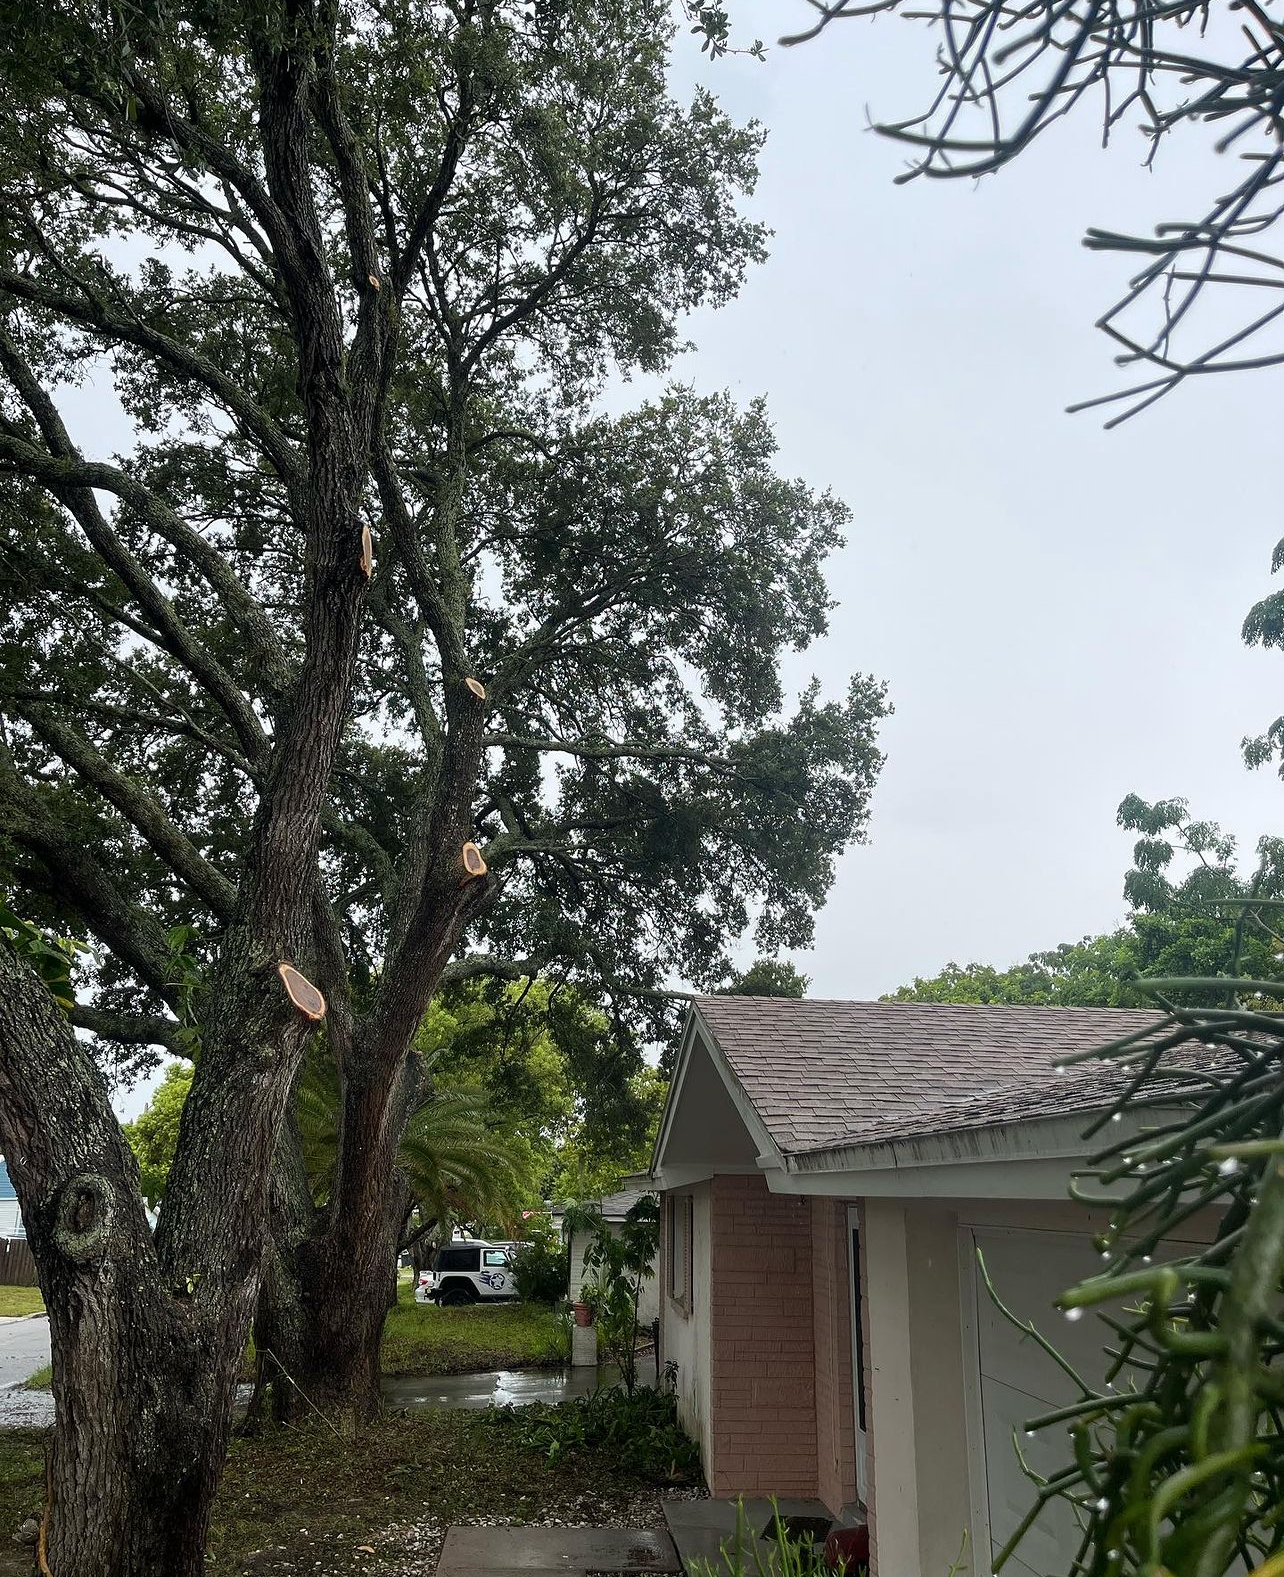 newly trimmed residential trees